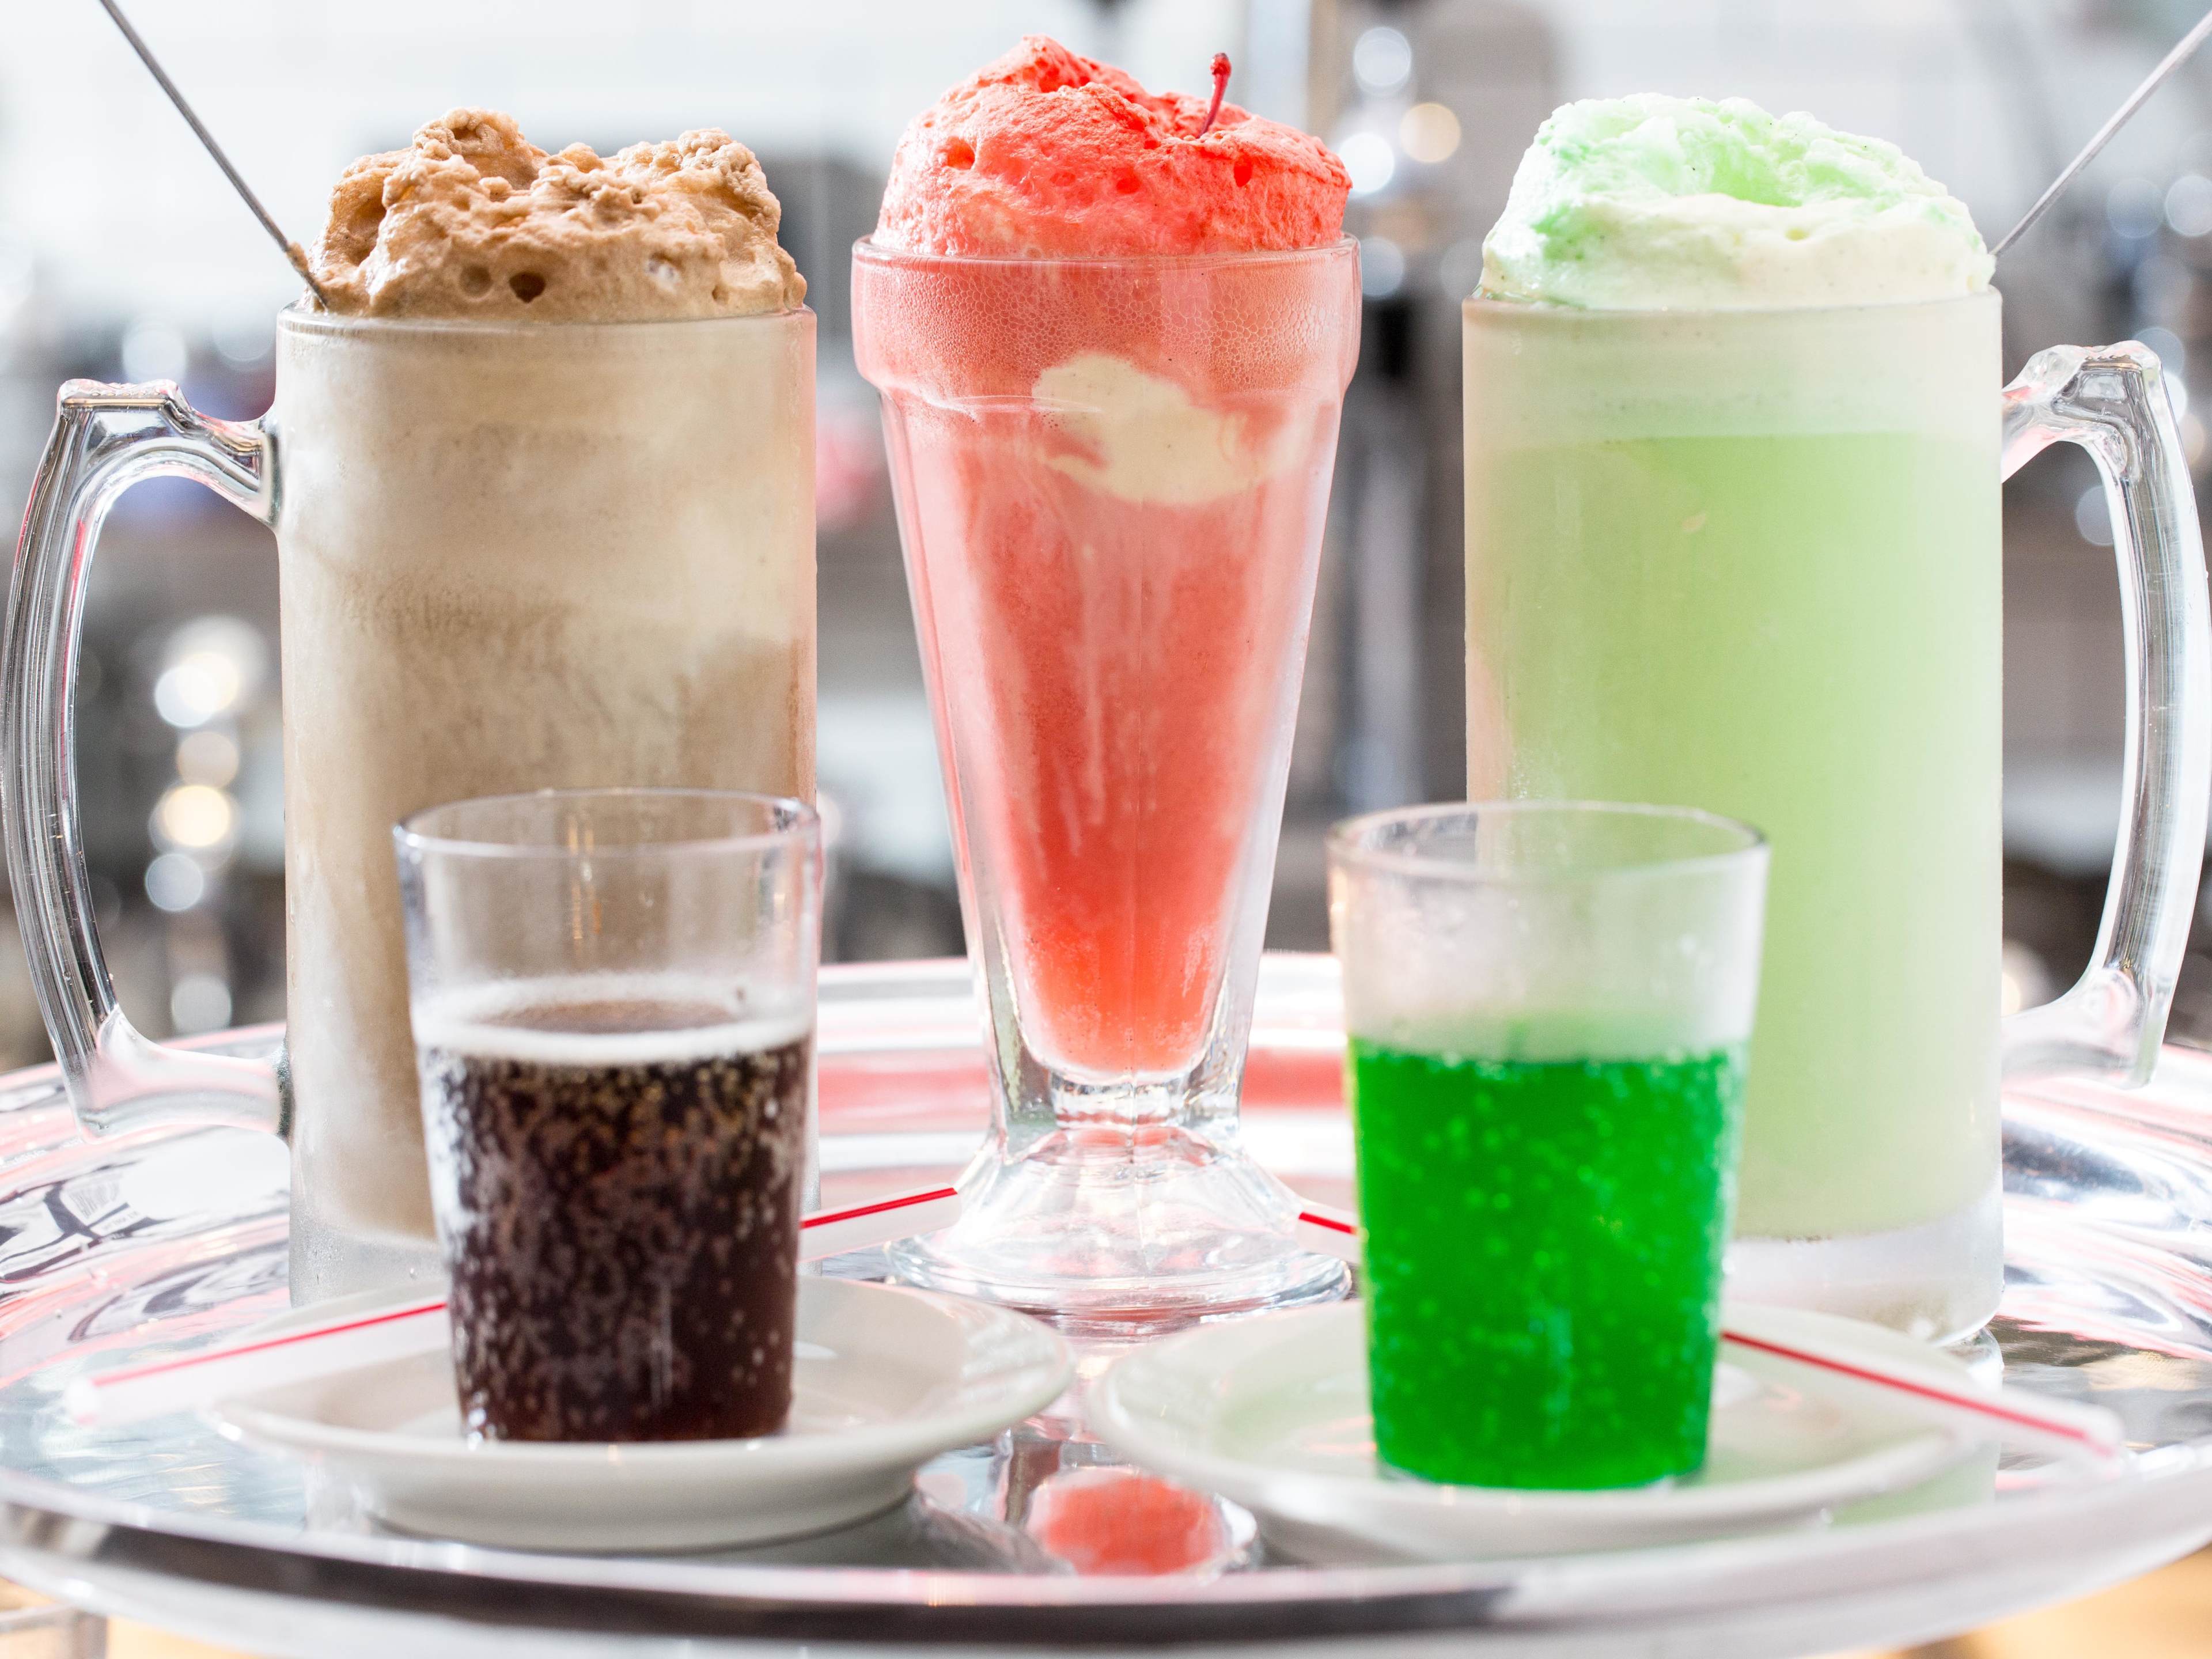 A spread of floats from Eleven City Diner.